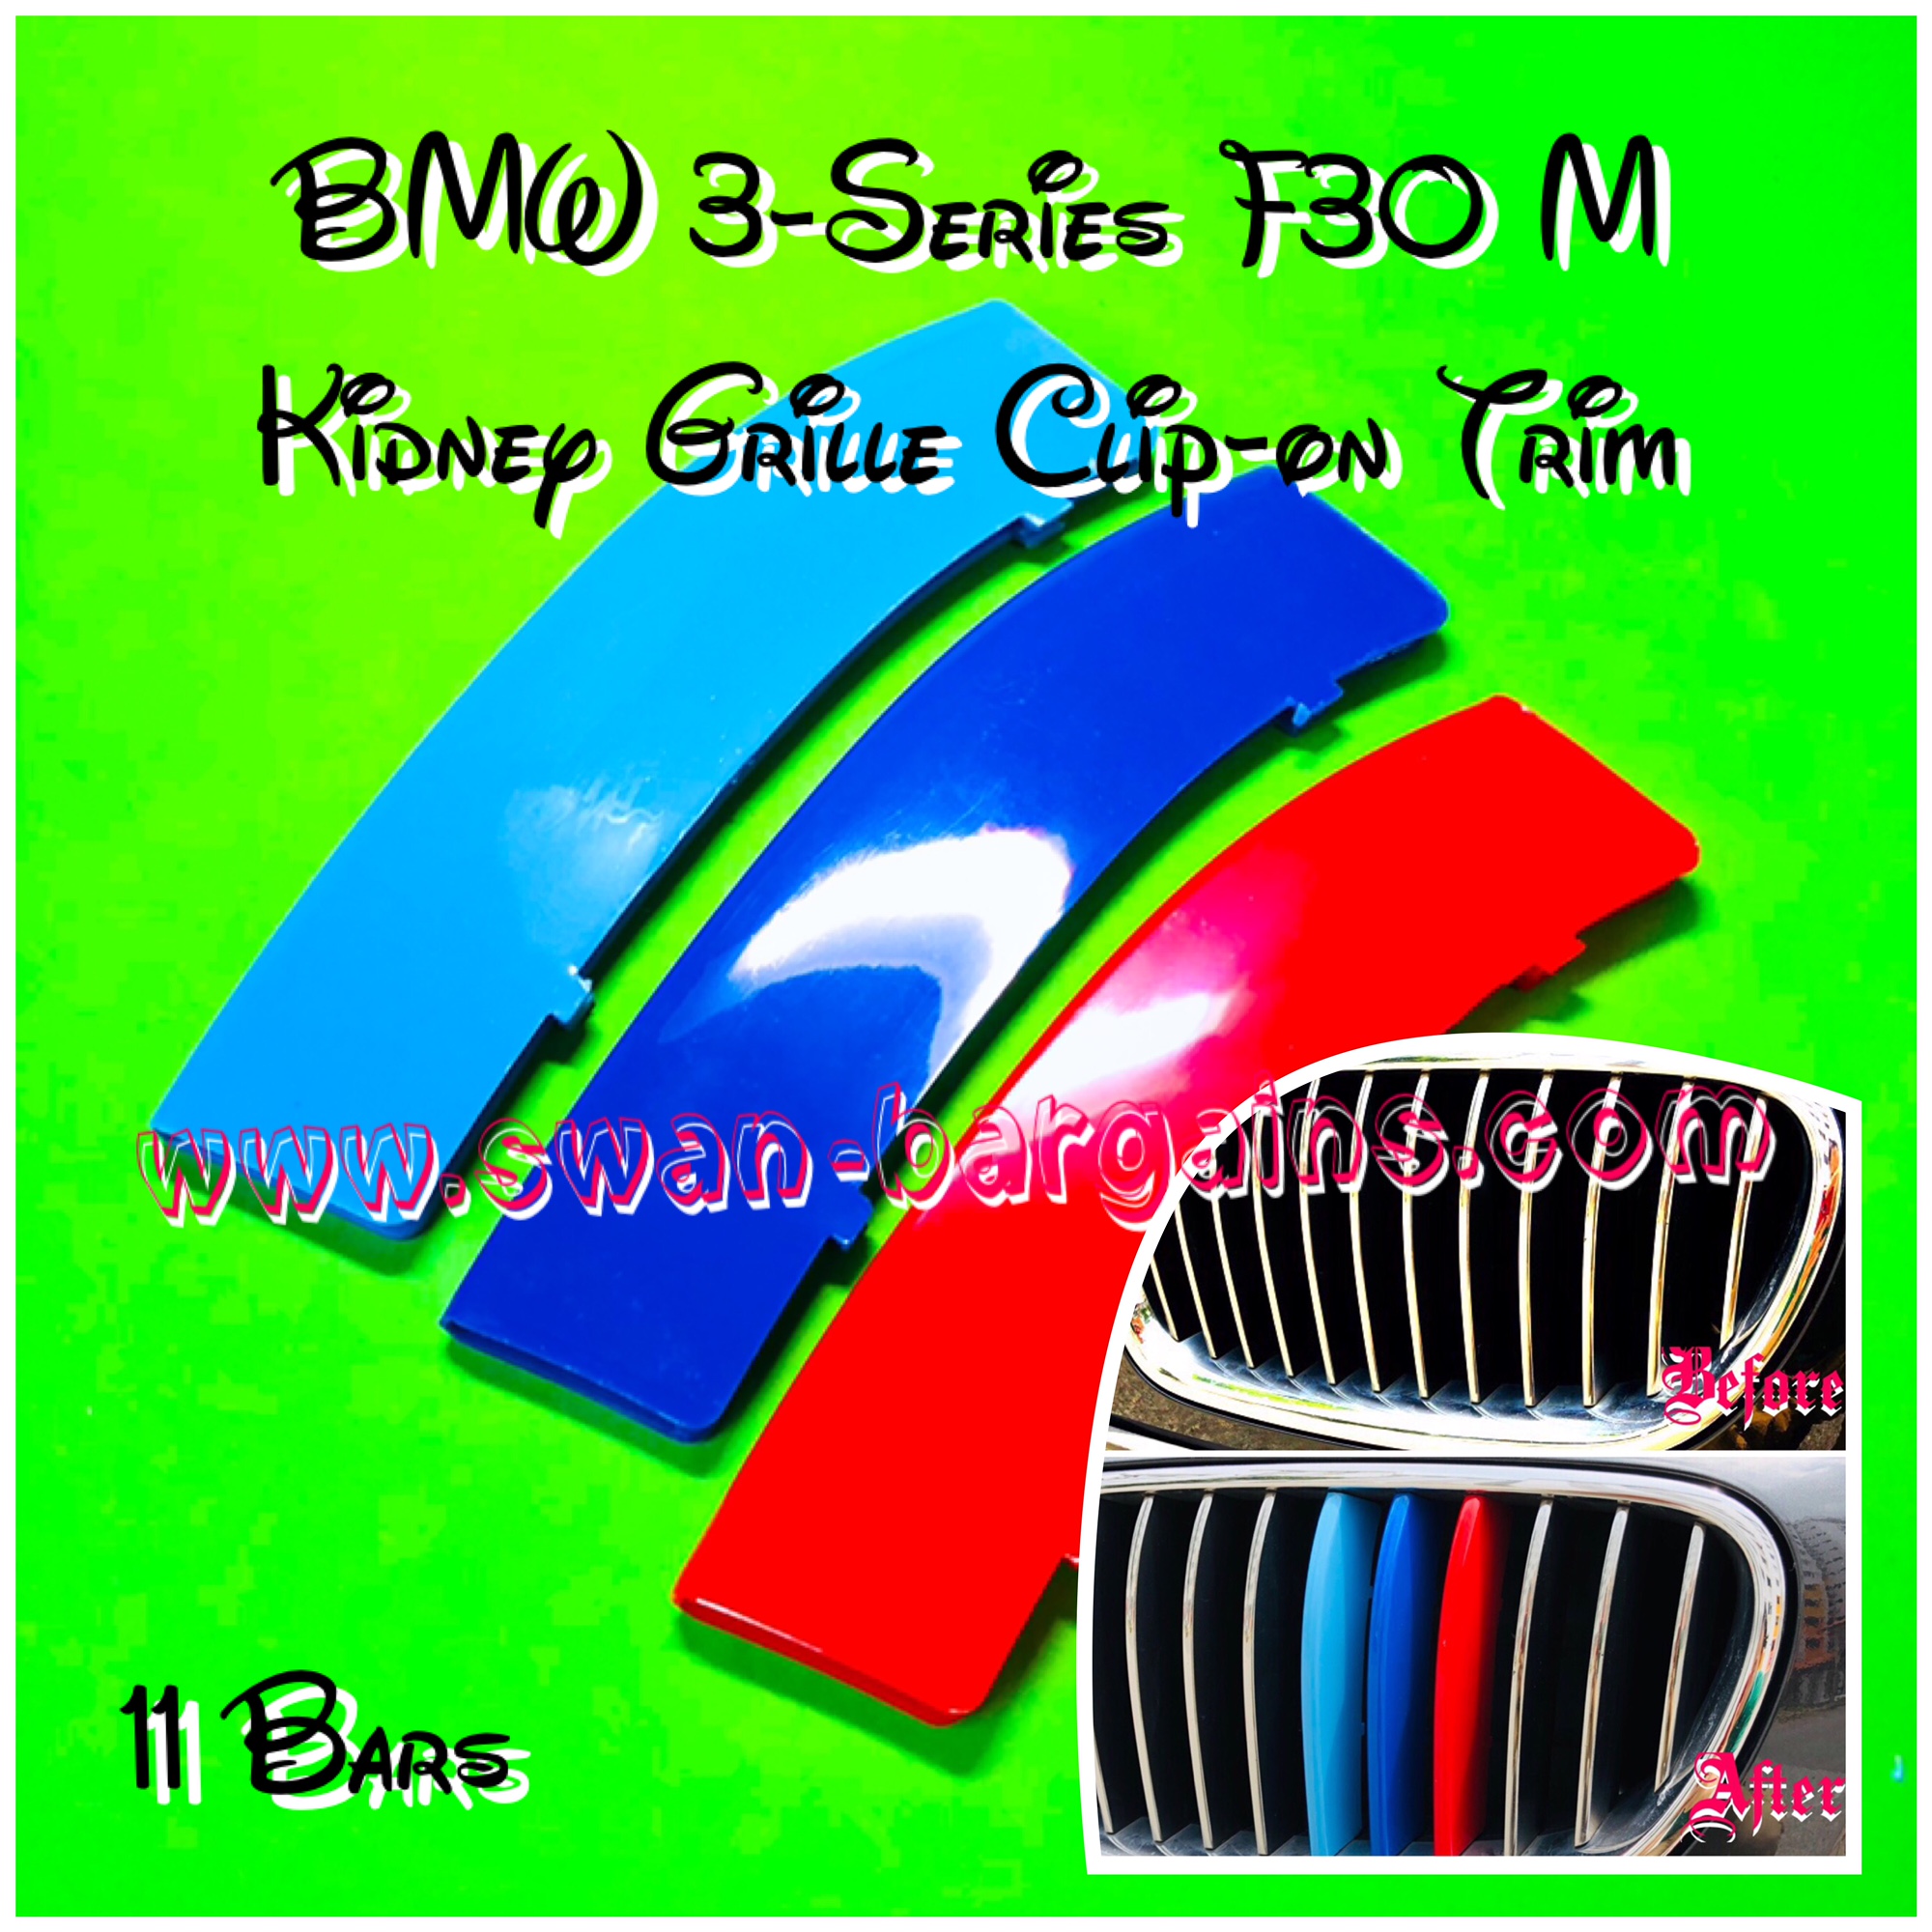 3-Series BMW Kidney Grille Tri-Color Snap-in Trim Singapore - F30 11 Bars